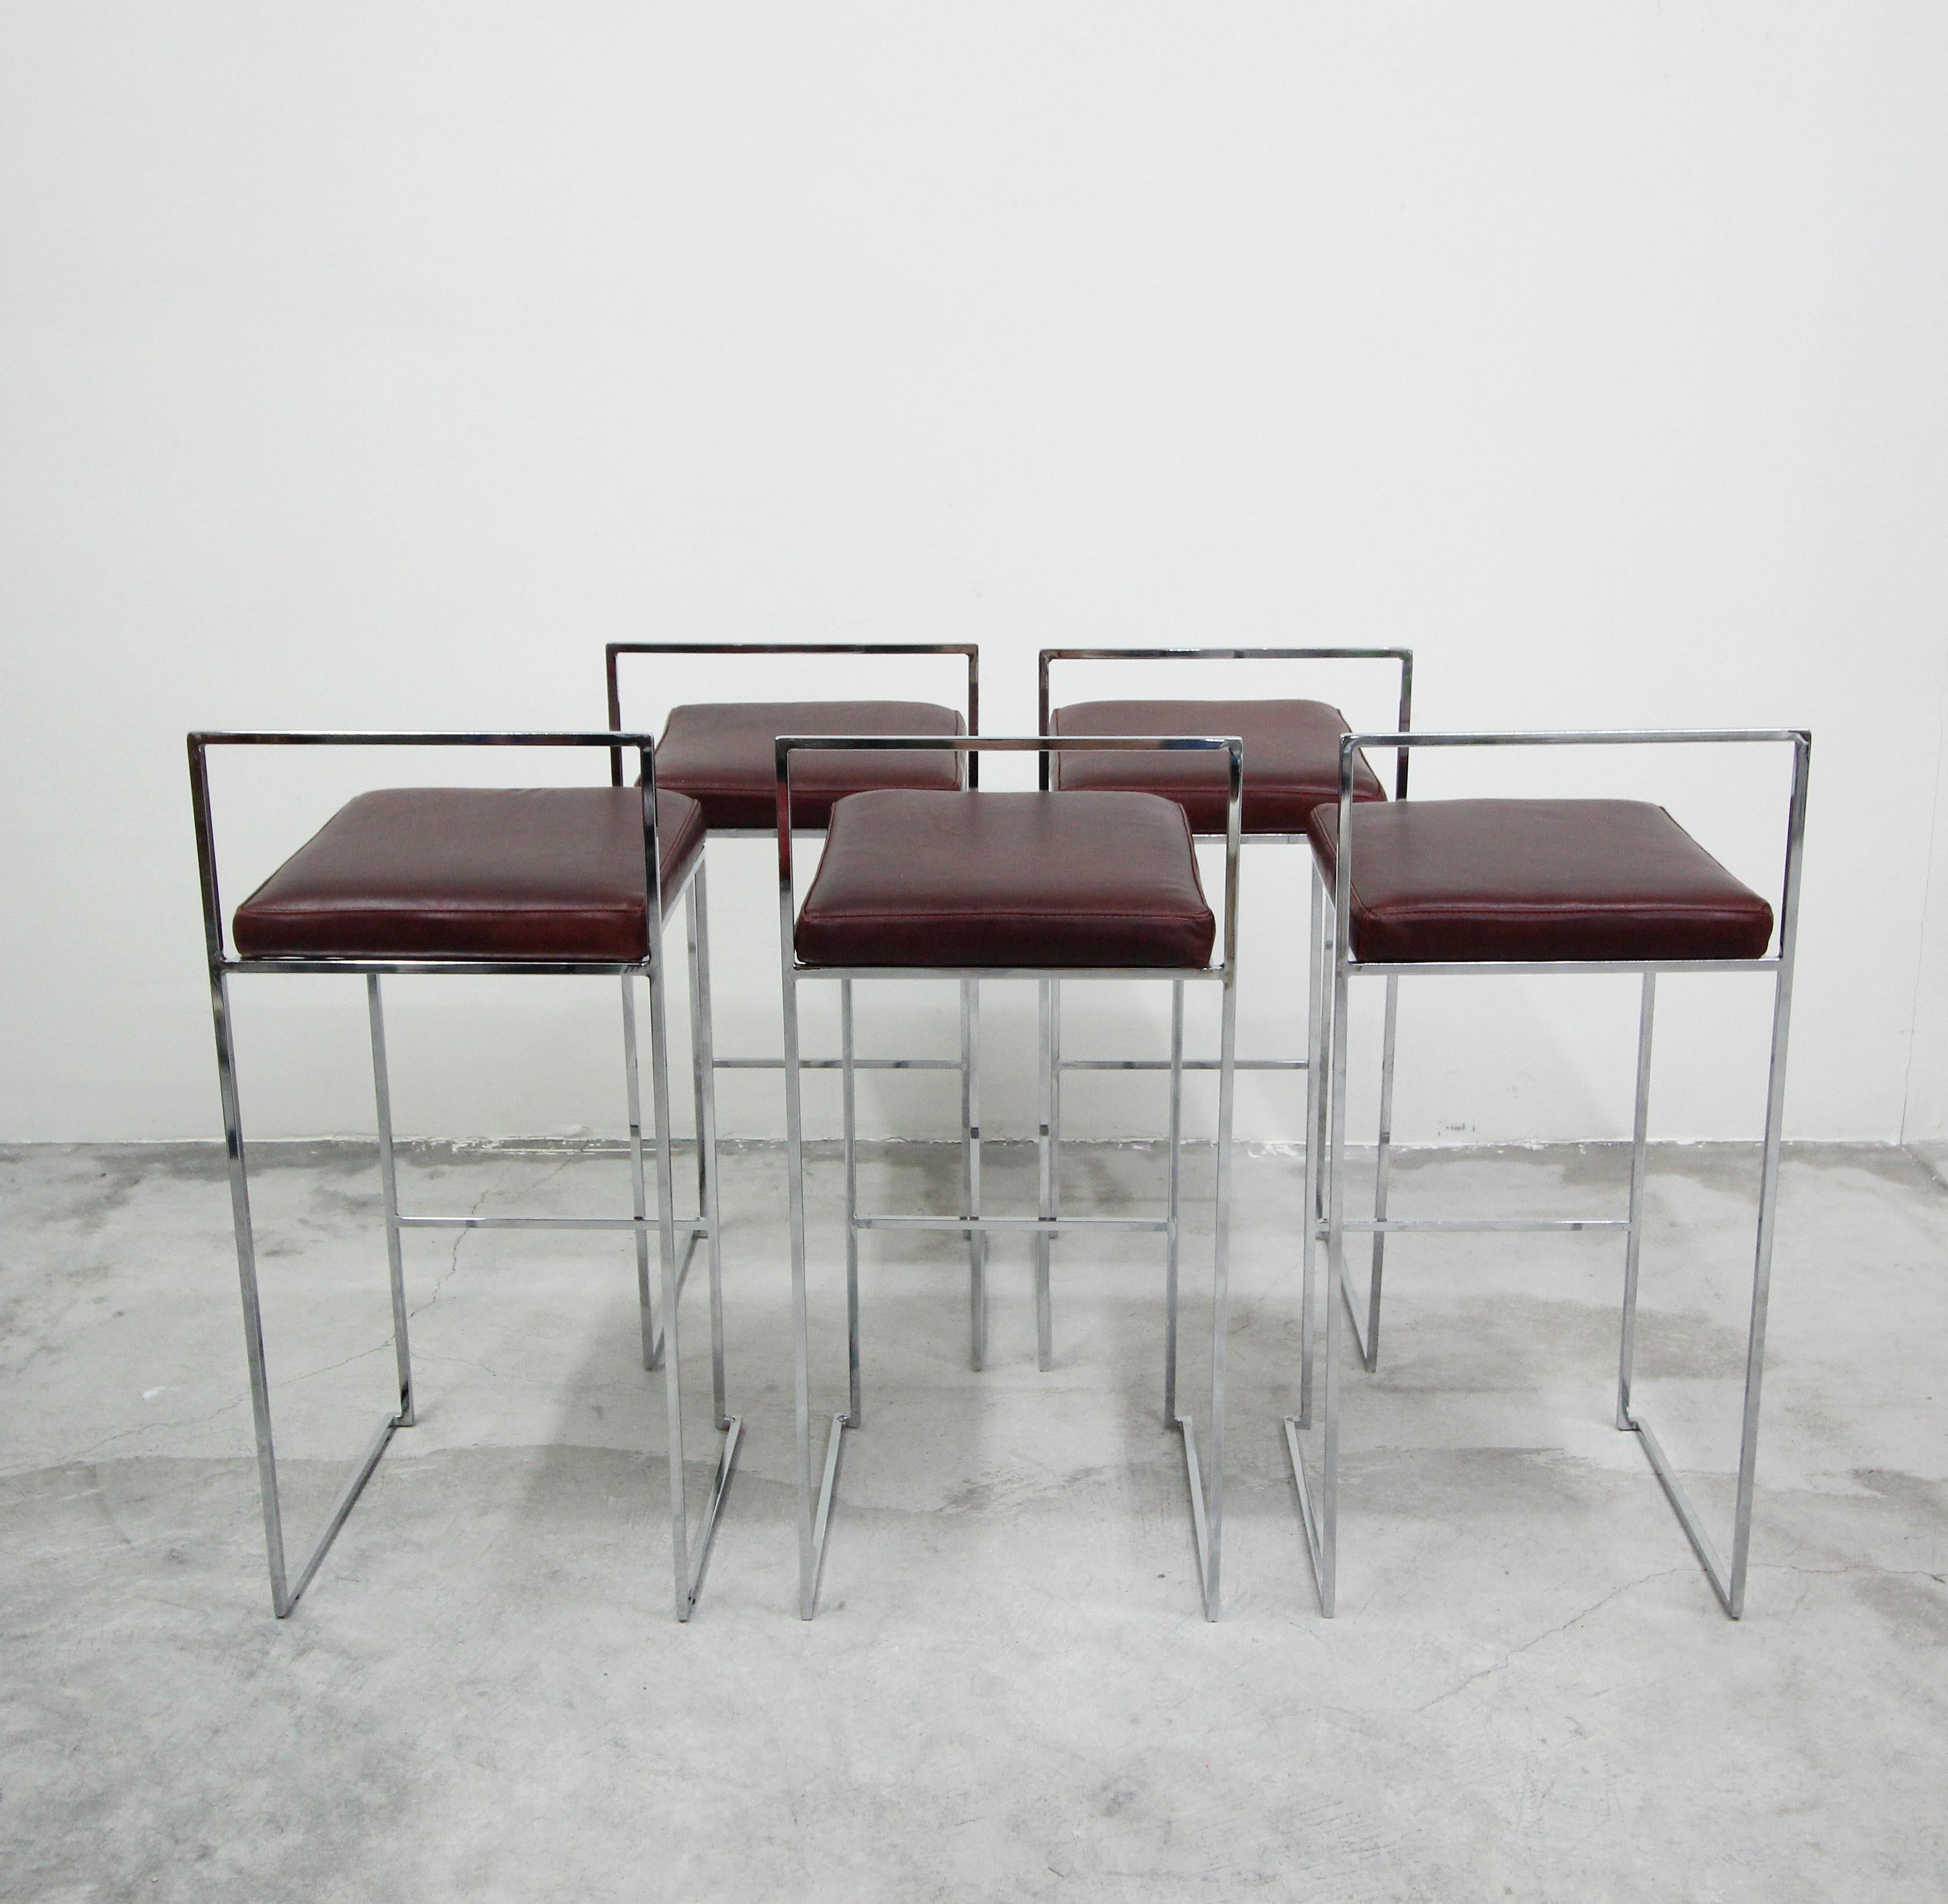 20th Century Set of Five Mid Century Thin Line Chrome and Leather Bar Stools by Milo Baughman